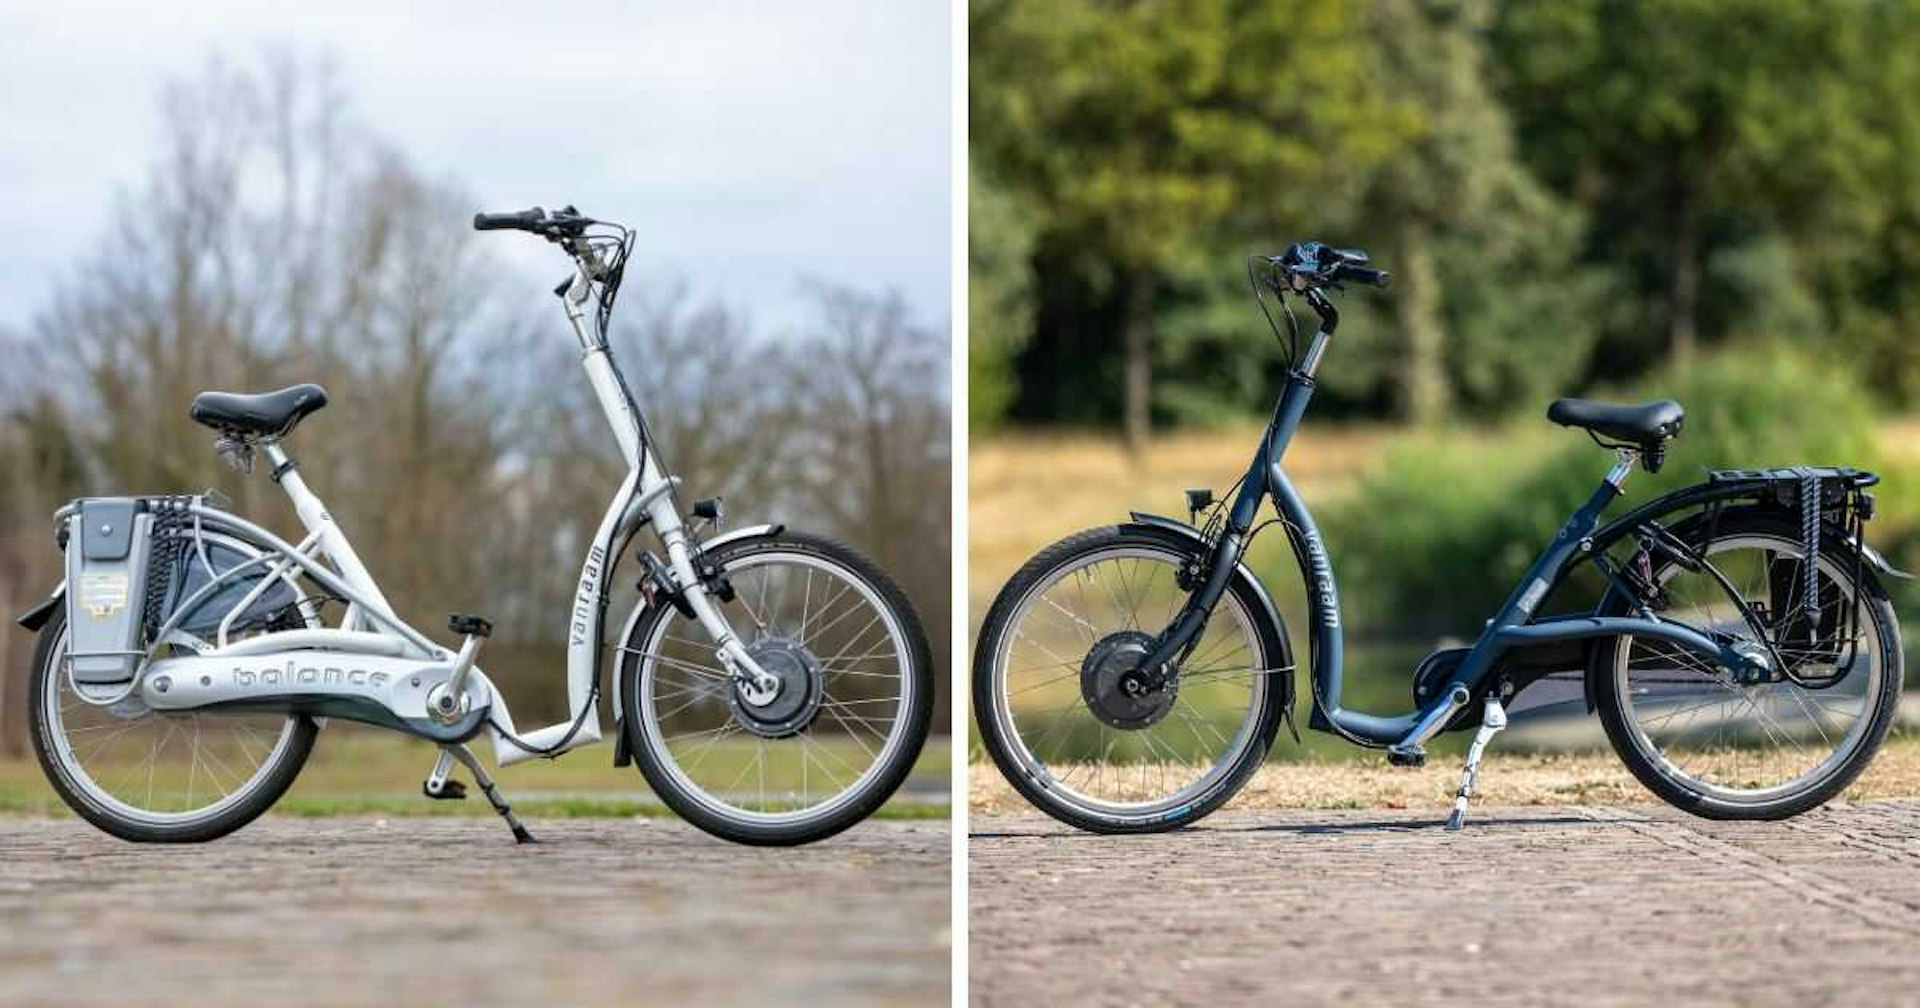 Differences between 1st and 2nd generation low entry bike Balance Van Raam